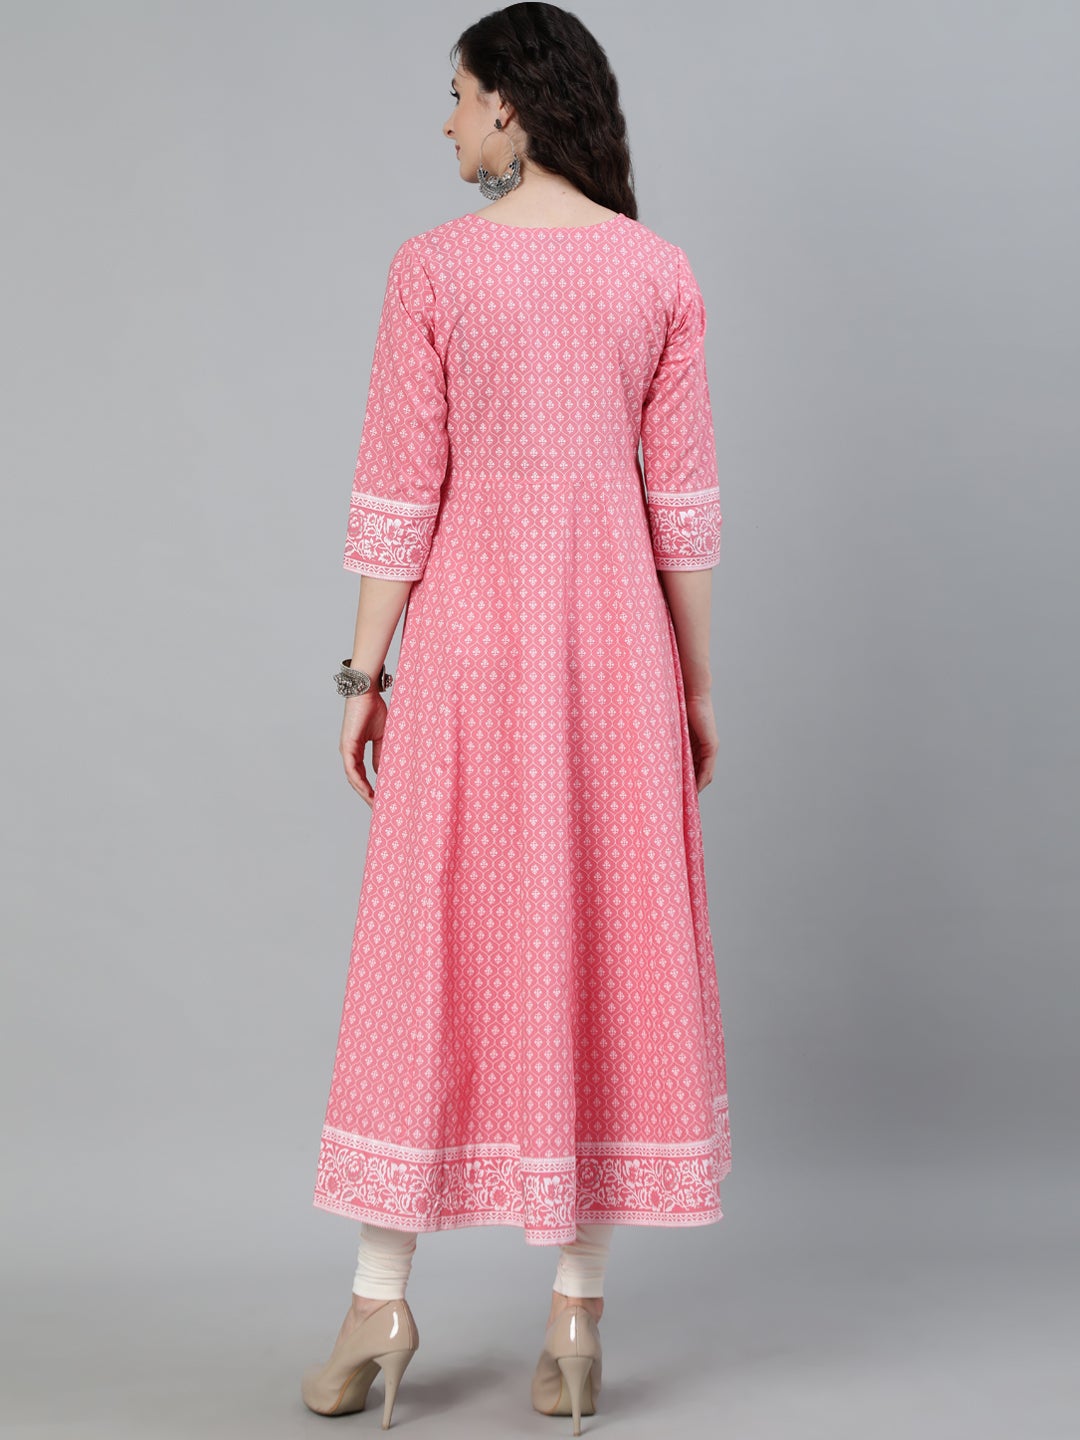 Pink Printed Anarkali with Embroidered Yoke